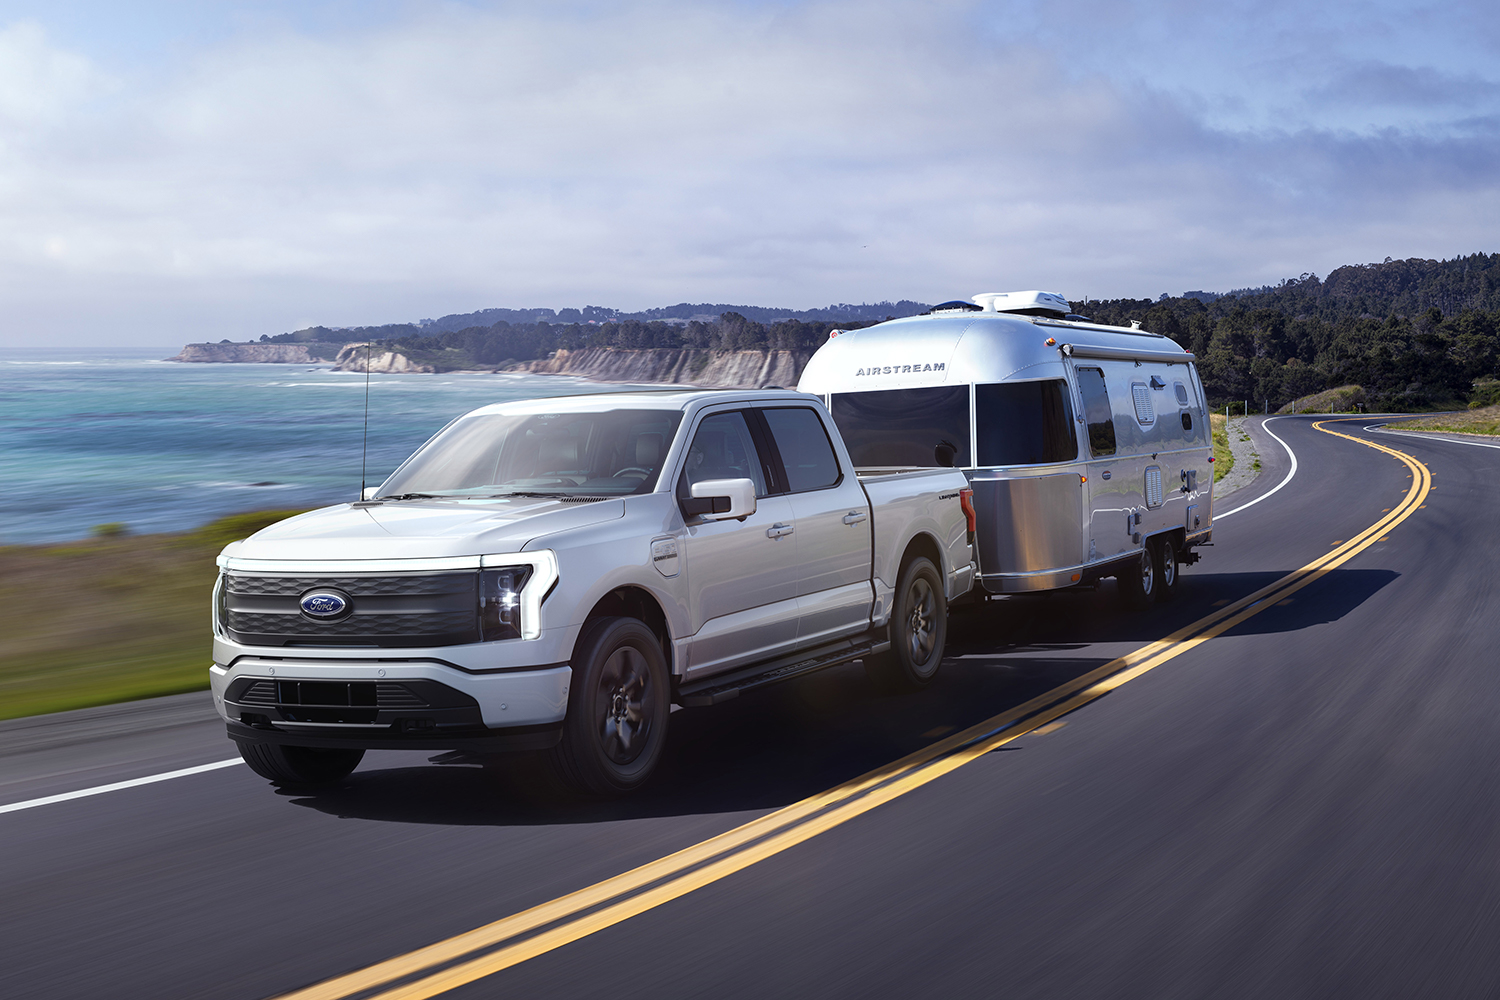 A Ford F-150 Lightning Lariat, a mid-tier trim of the electric pickup truck, towing an Airstream travel trailer